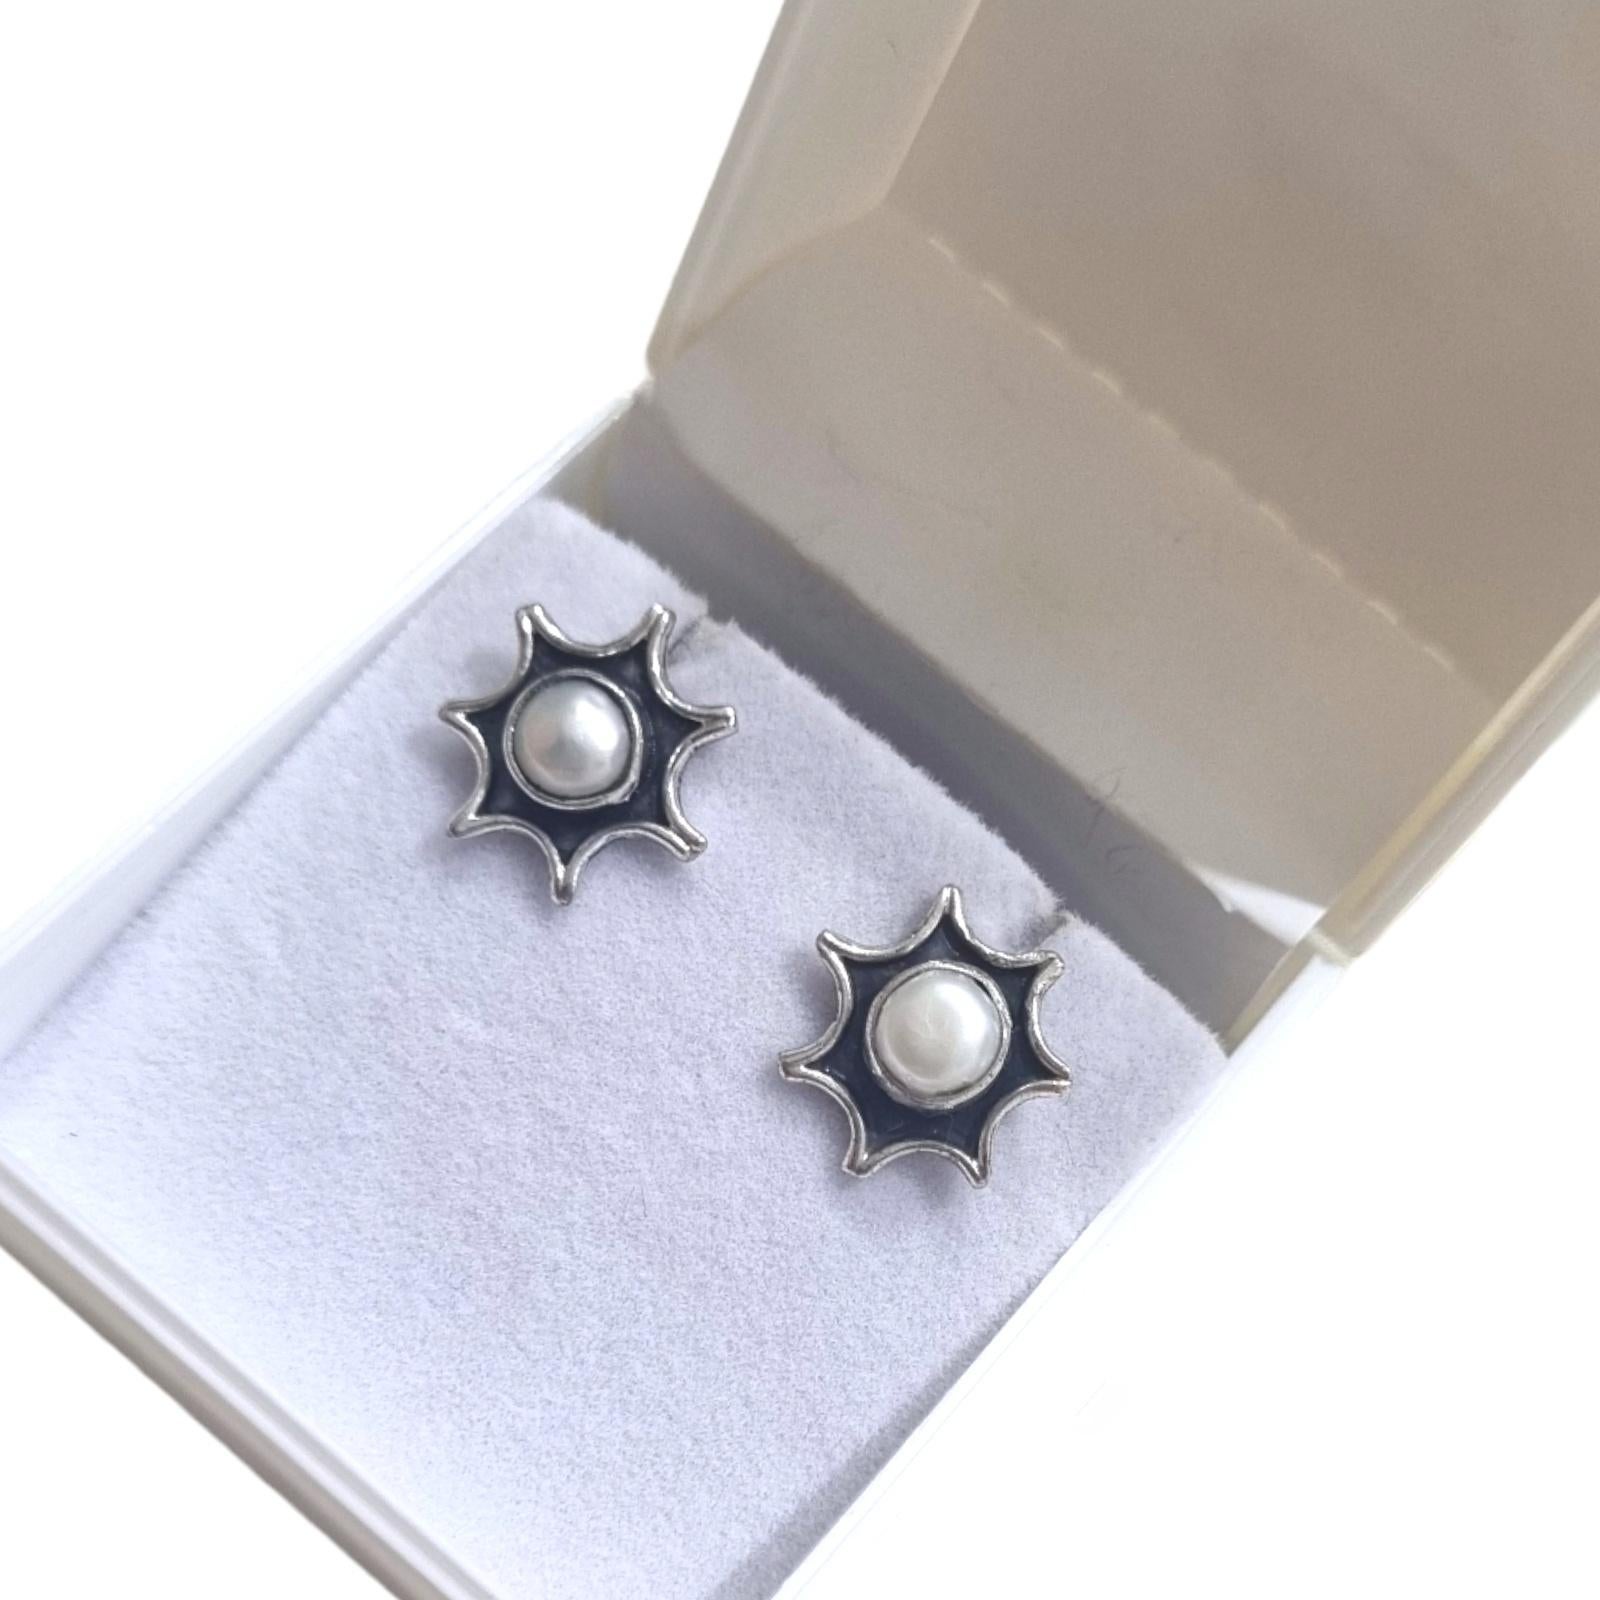 Metal - Sterling silver
Gross Weight - 2.78 Grams
Gemstones - Freshwater Pearls

Elevate your style with our exquisite sterling silver stud earrings featuring lustrous white freshwater pearls. Crafted with precision and elegance, these designer